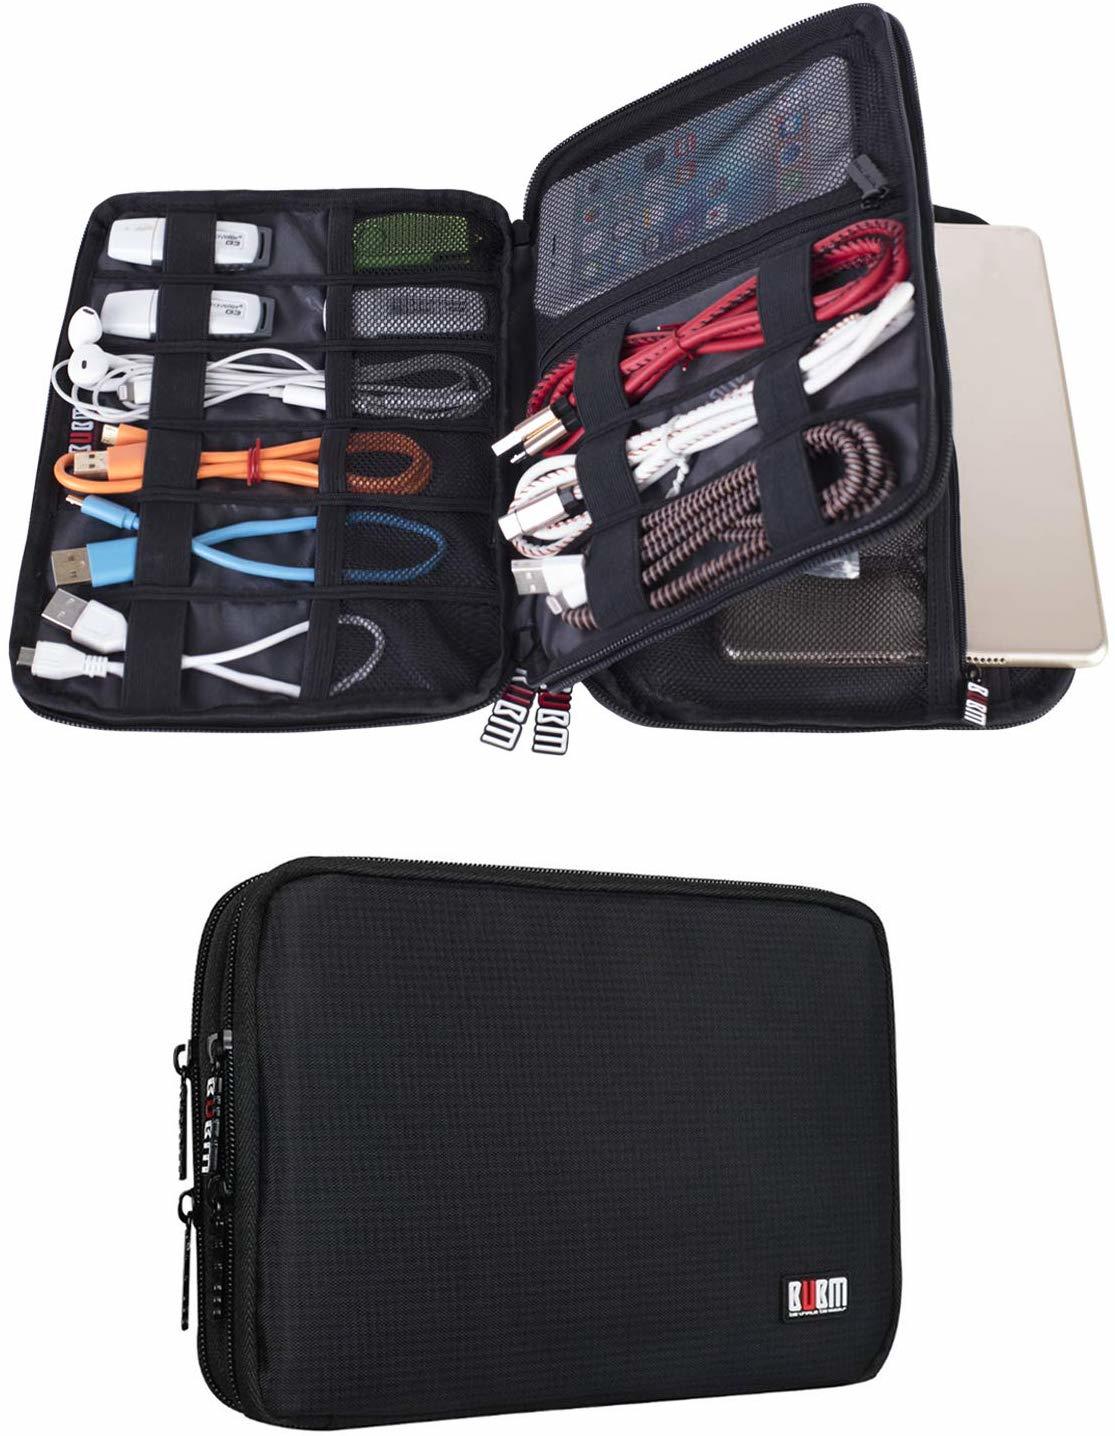 10 Best Travel Cable Organizer to Keep Your Electronic Accessories Tidy 7